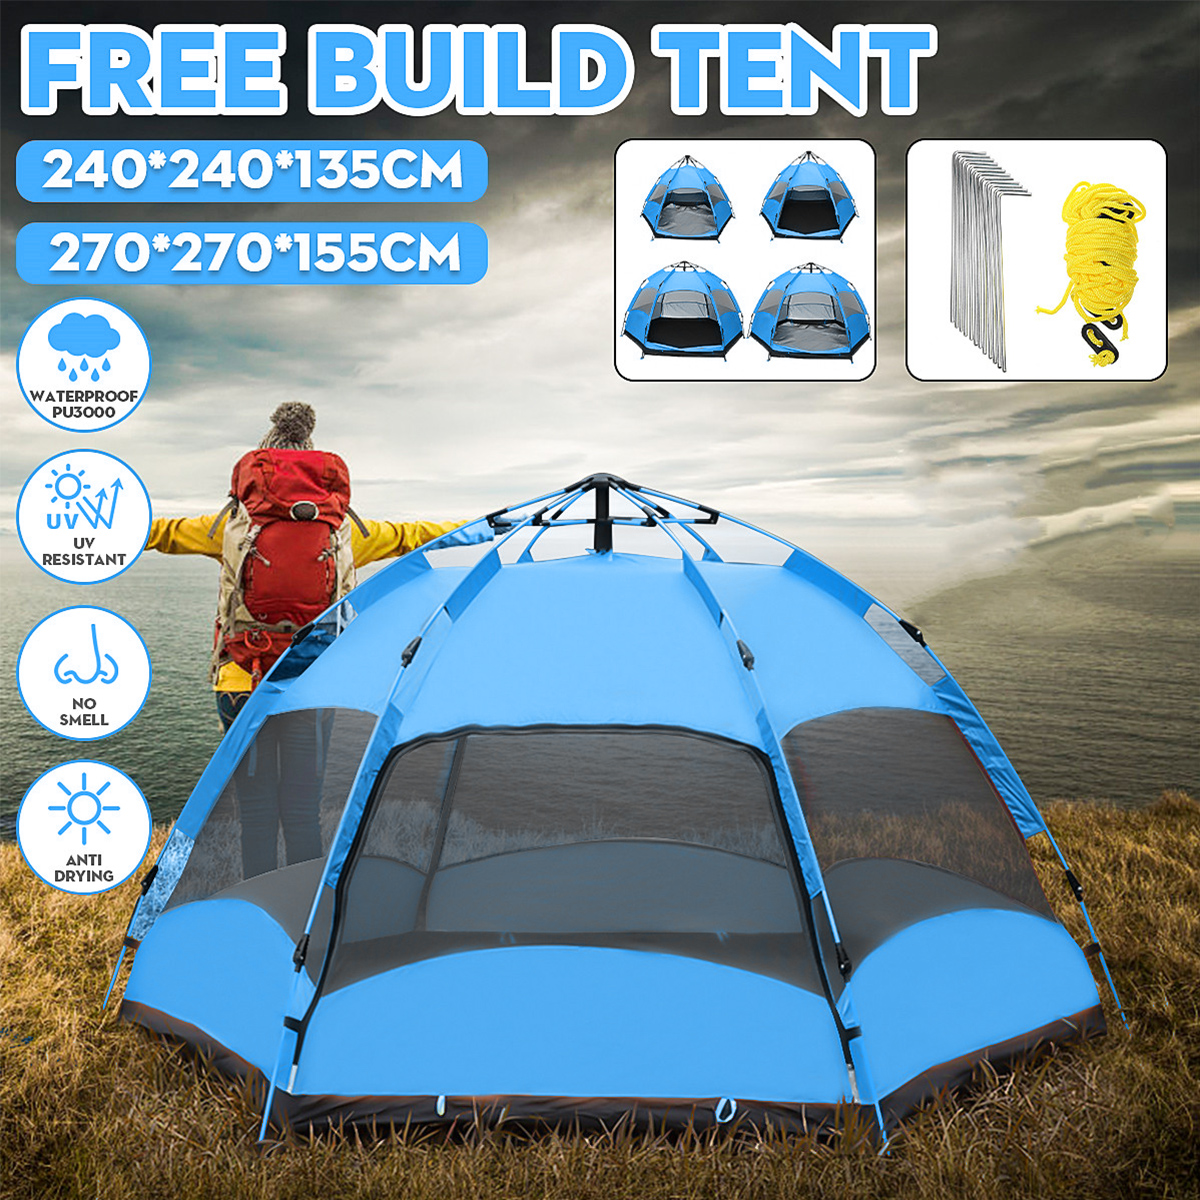 4-6 Person Automatic Camping Tent Large Waterproof Outdoor Hiking Trave